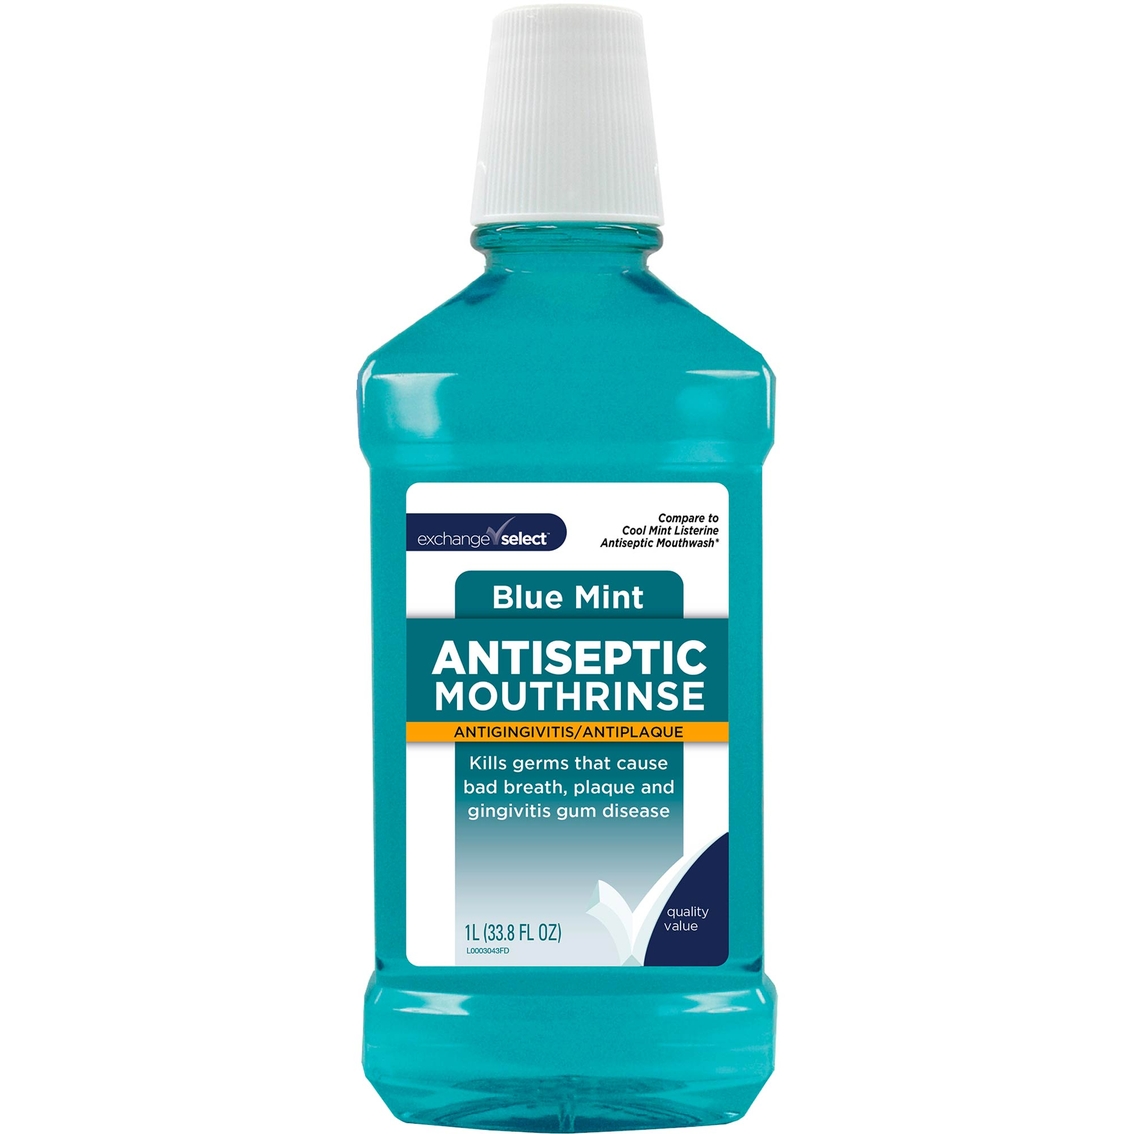 Exchange Select Blue Mint Antiseptic Mouthrinse 1L - Image 1 of 2